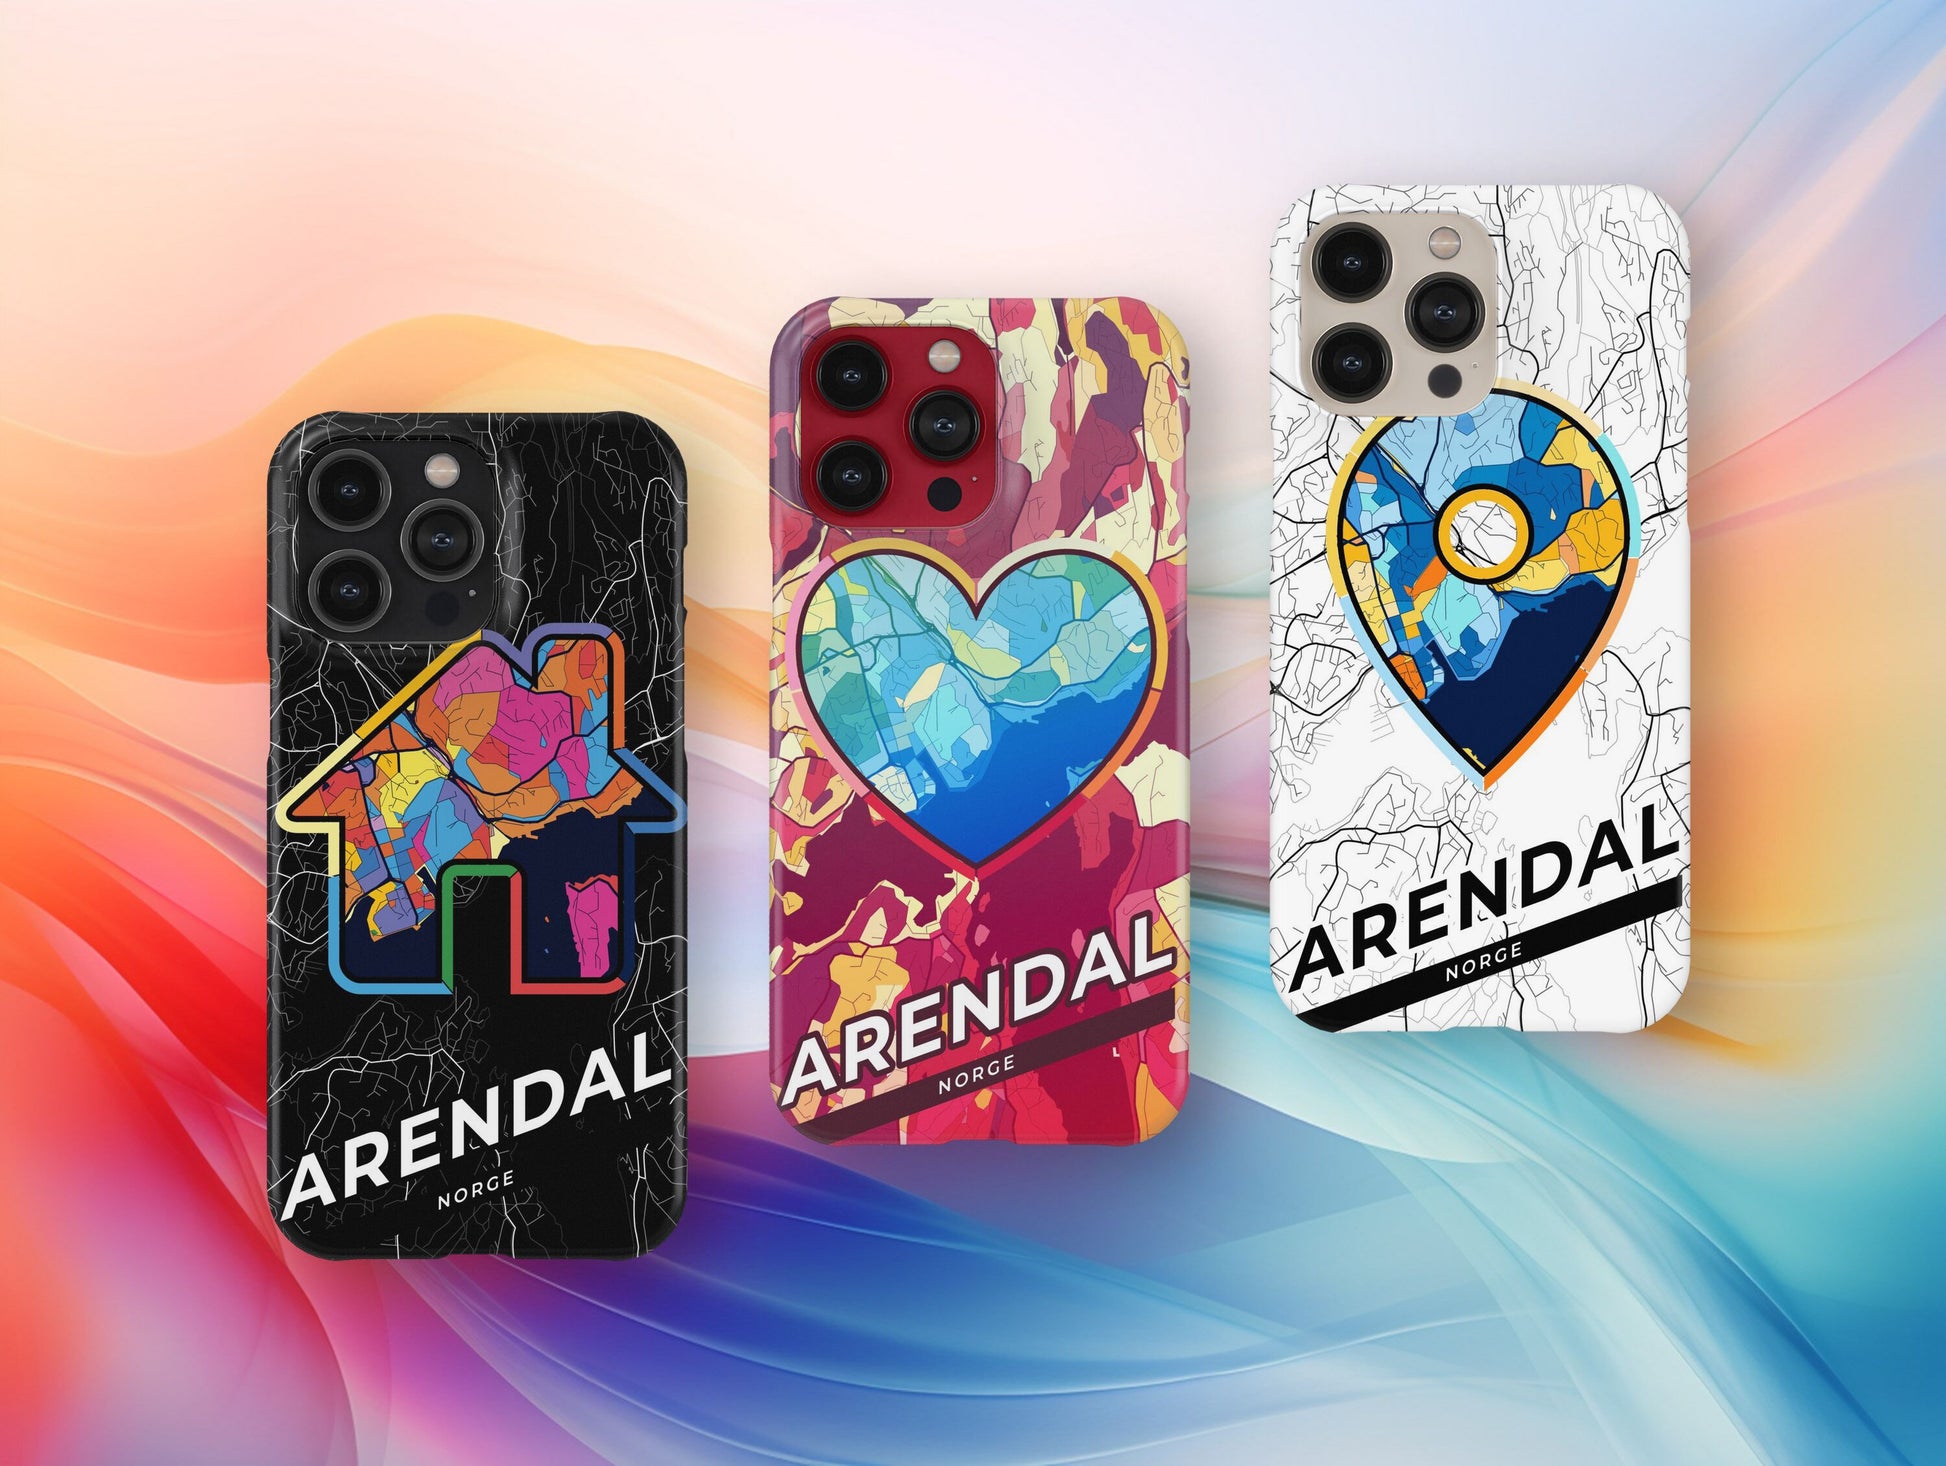 Arendal Norway slim phone case with colorful icon. Birthday, wedding or housewarming gift. Couple match cases.